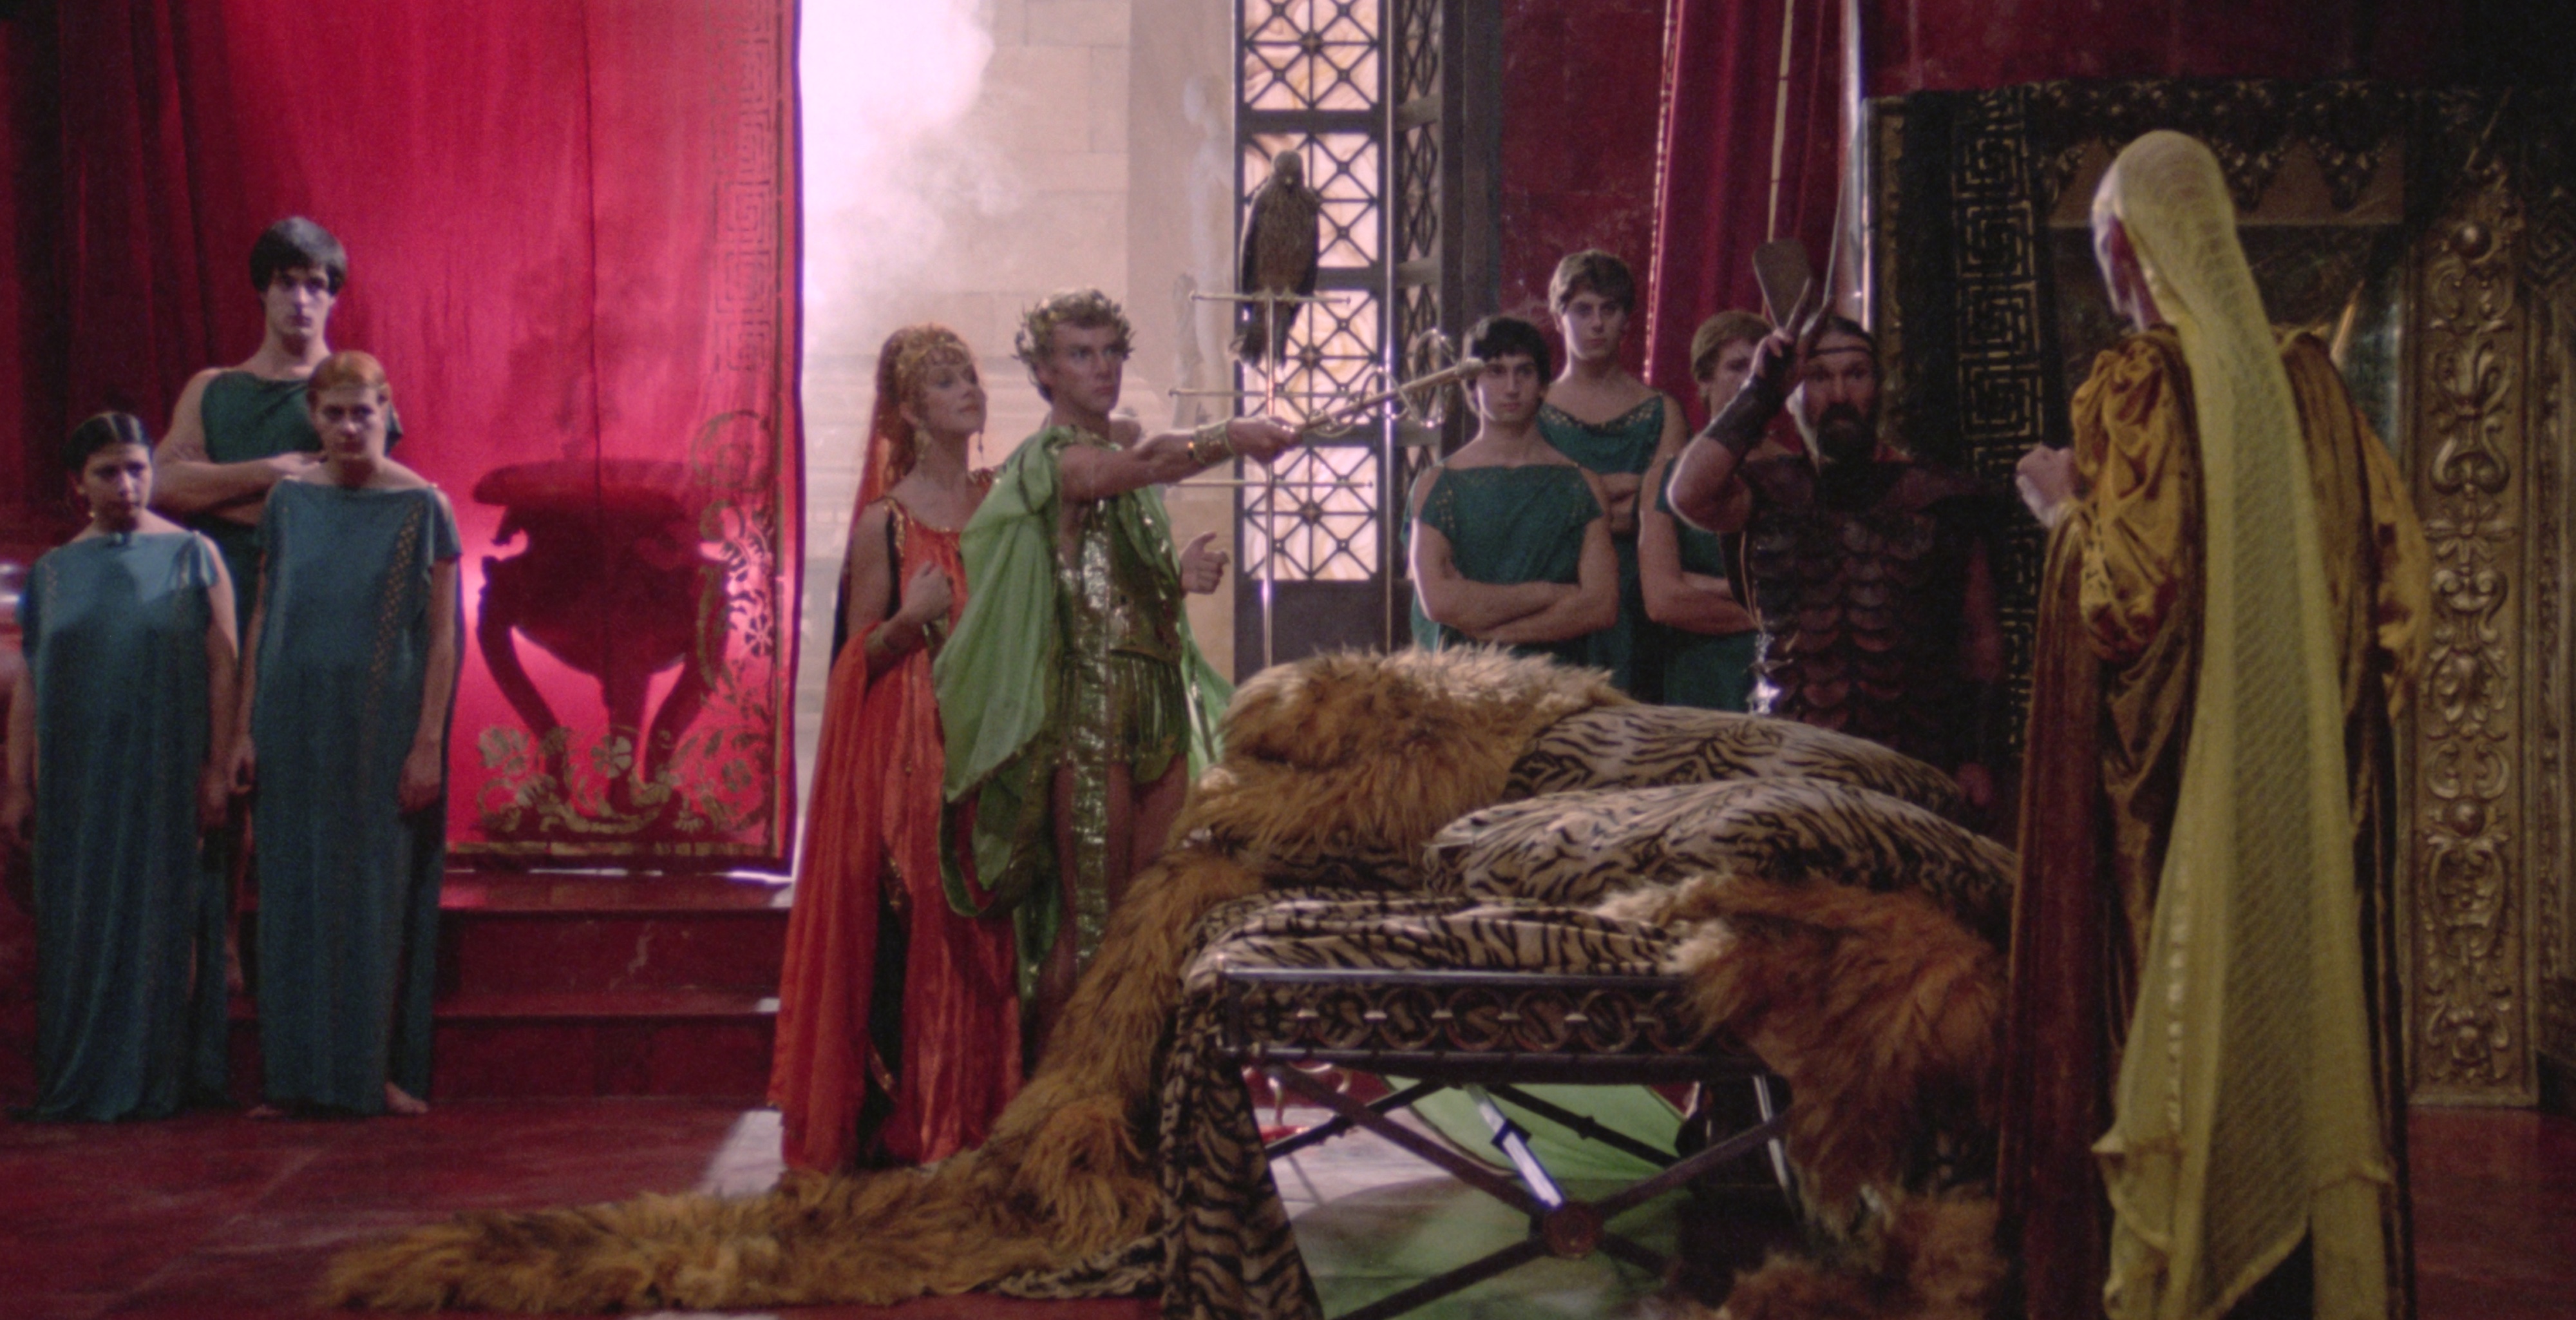 Cult Classic Caligula Returns To The Big Screen For Its World Premiere At Cannes Film